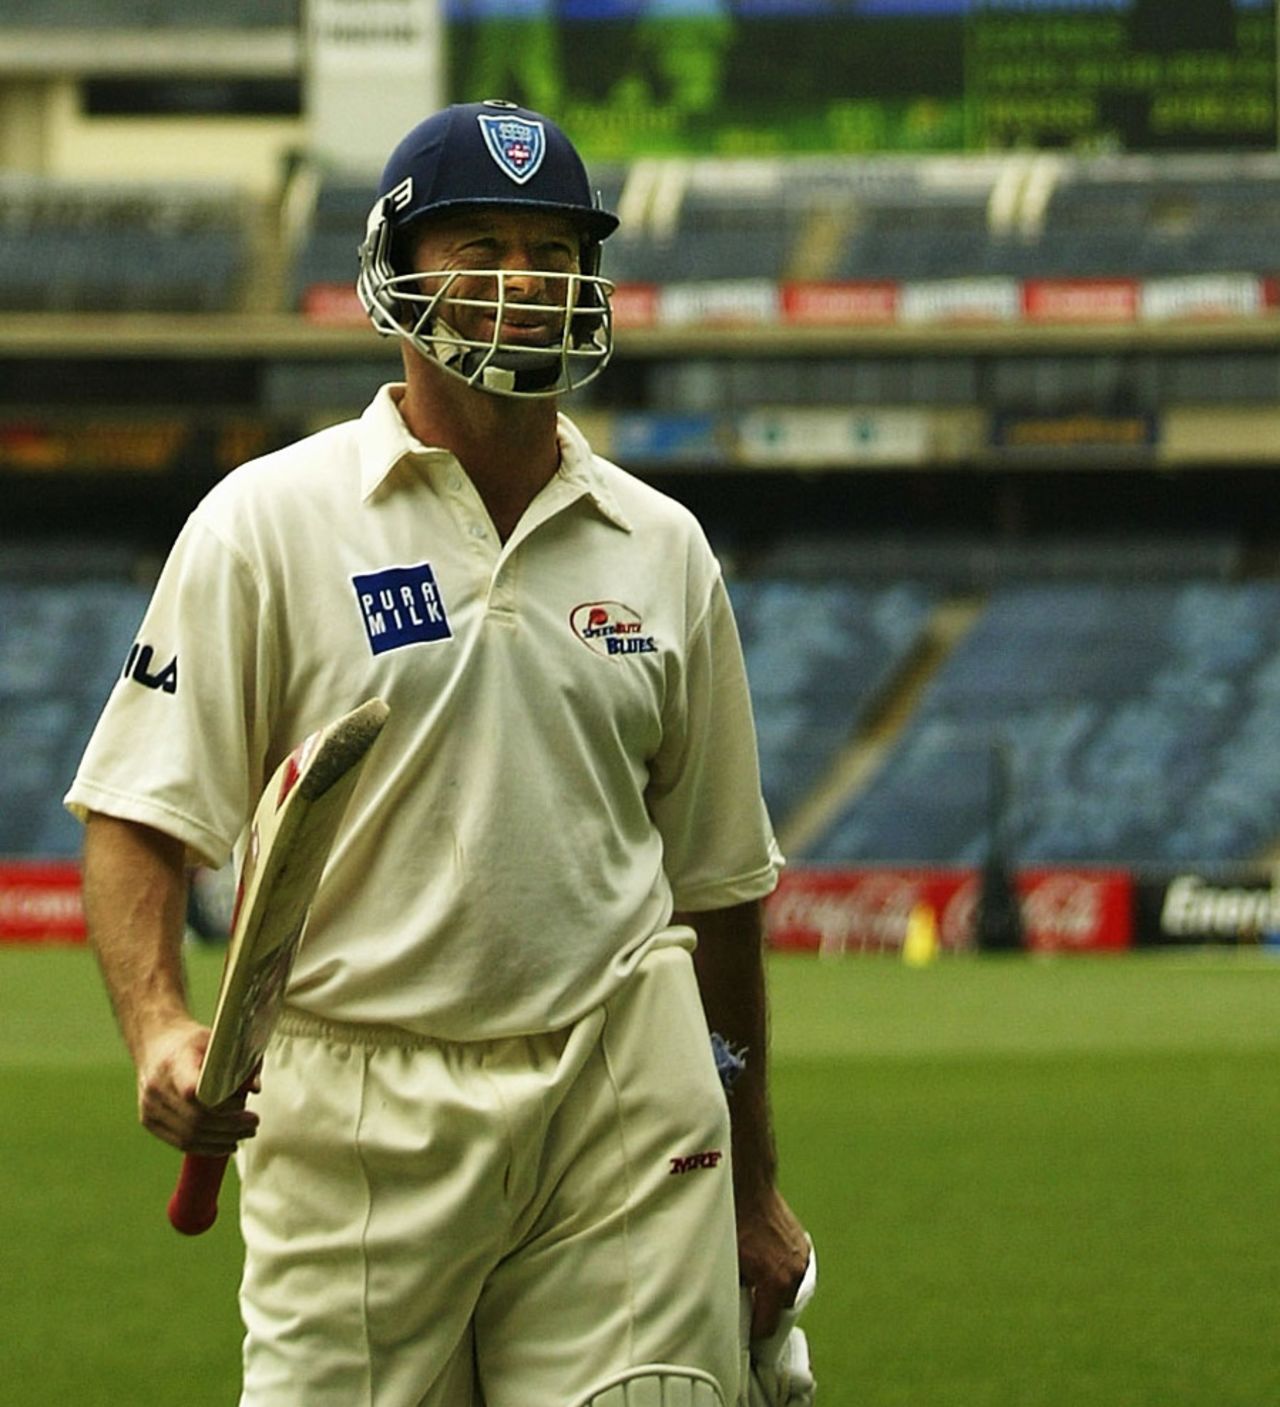 Steve Waugh walks back after making 211, Victoria v New South Wales, Pura Cup, Melbourne, 2nd day, February 6, 2003